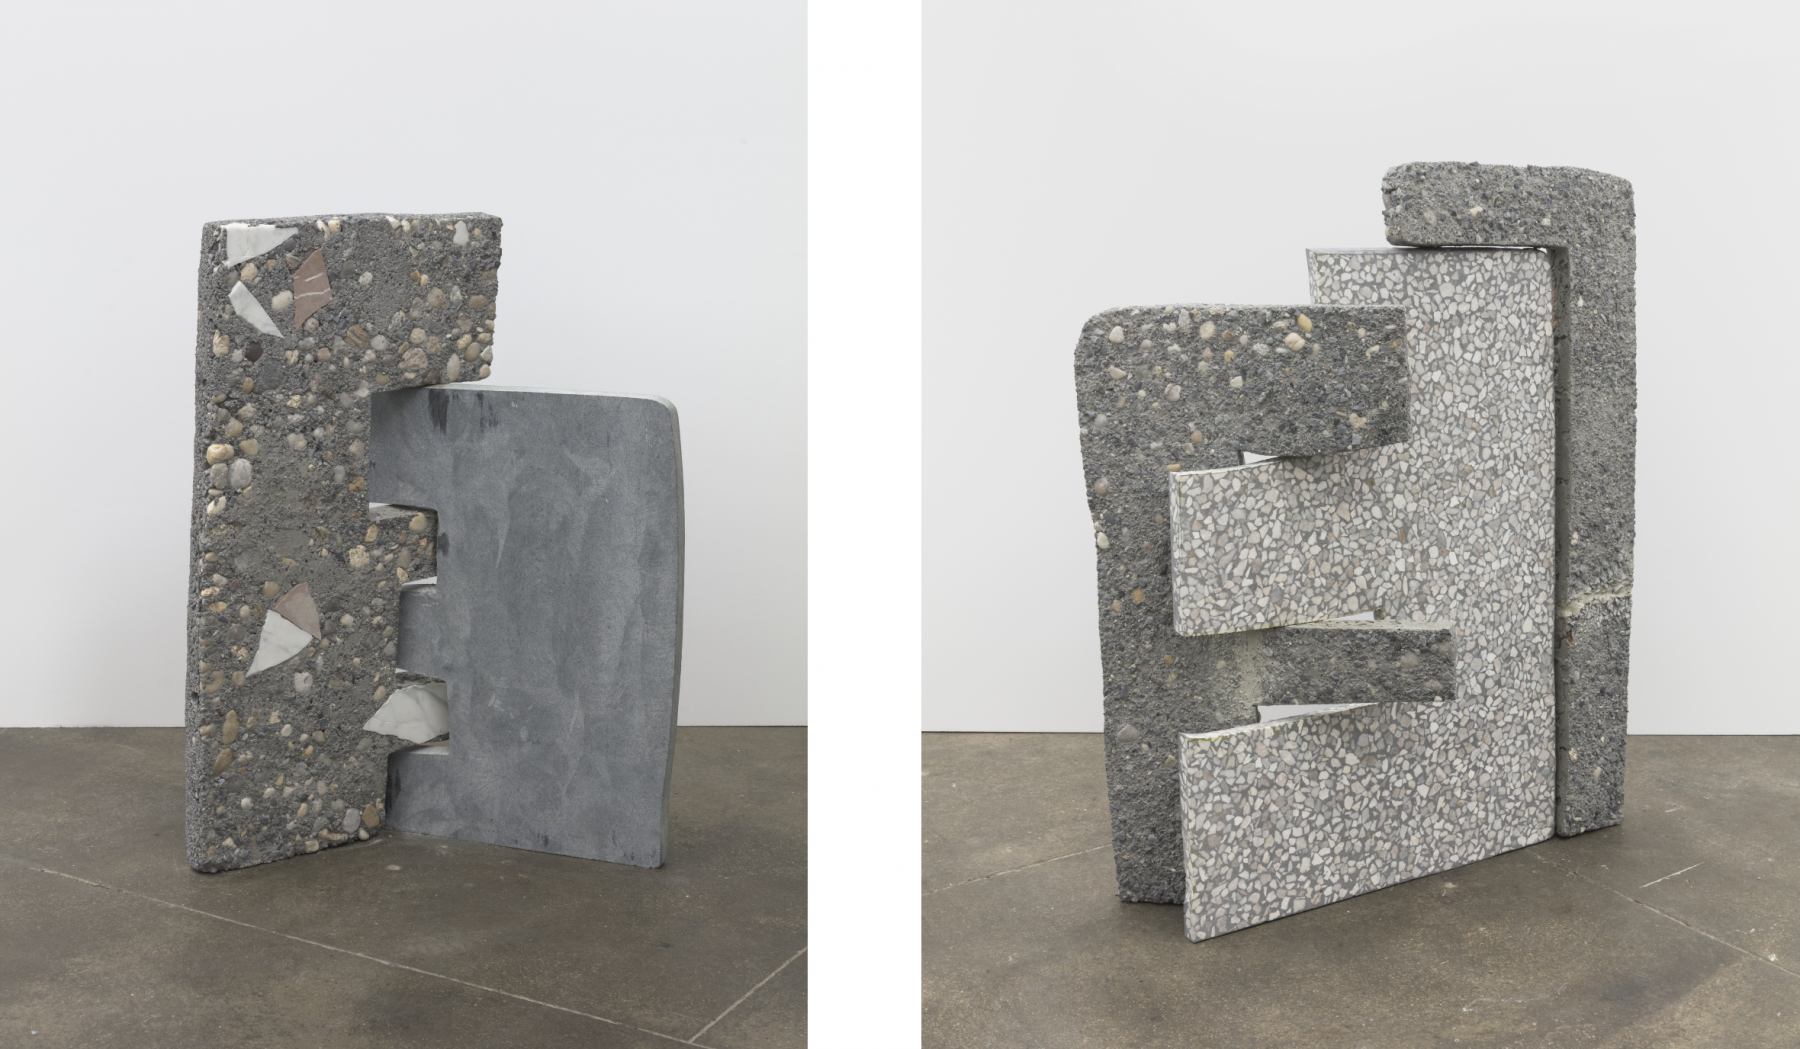 &nbsp;

Dependents 3, 2021
soapstone and terrazzo
31 1/4 x 23 1/16 x 14 9/16 inches (79.4 x 58.5 x 37 cm) SM-S.21.1437

Dependents 8, 2021
soapstone and terrazzo
39 1/16 x 29 3/4 x 13 1/4 inches (99.3 x 75.5 x 33.7 cm) SM-S.21.1442